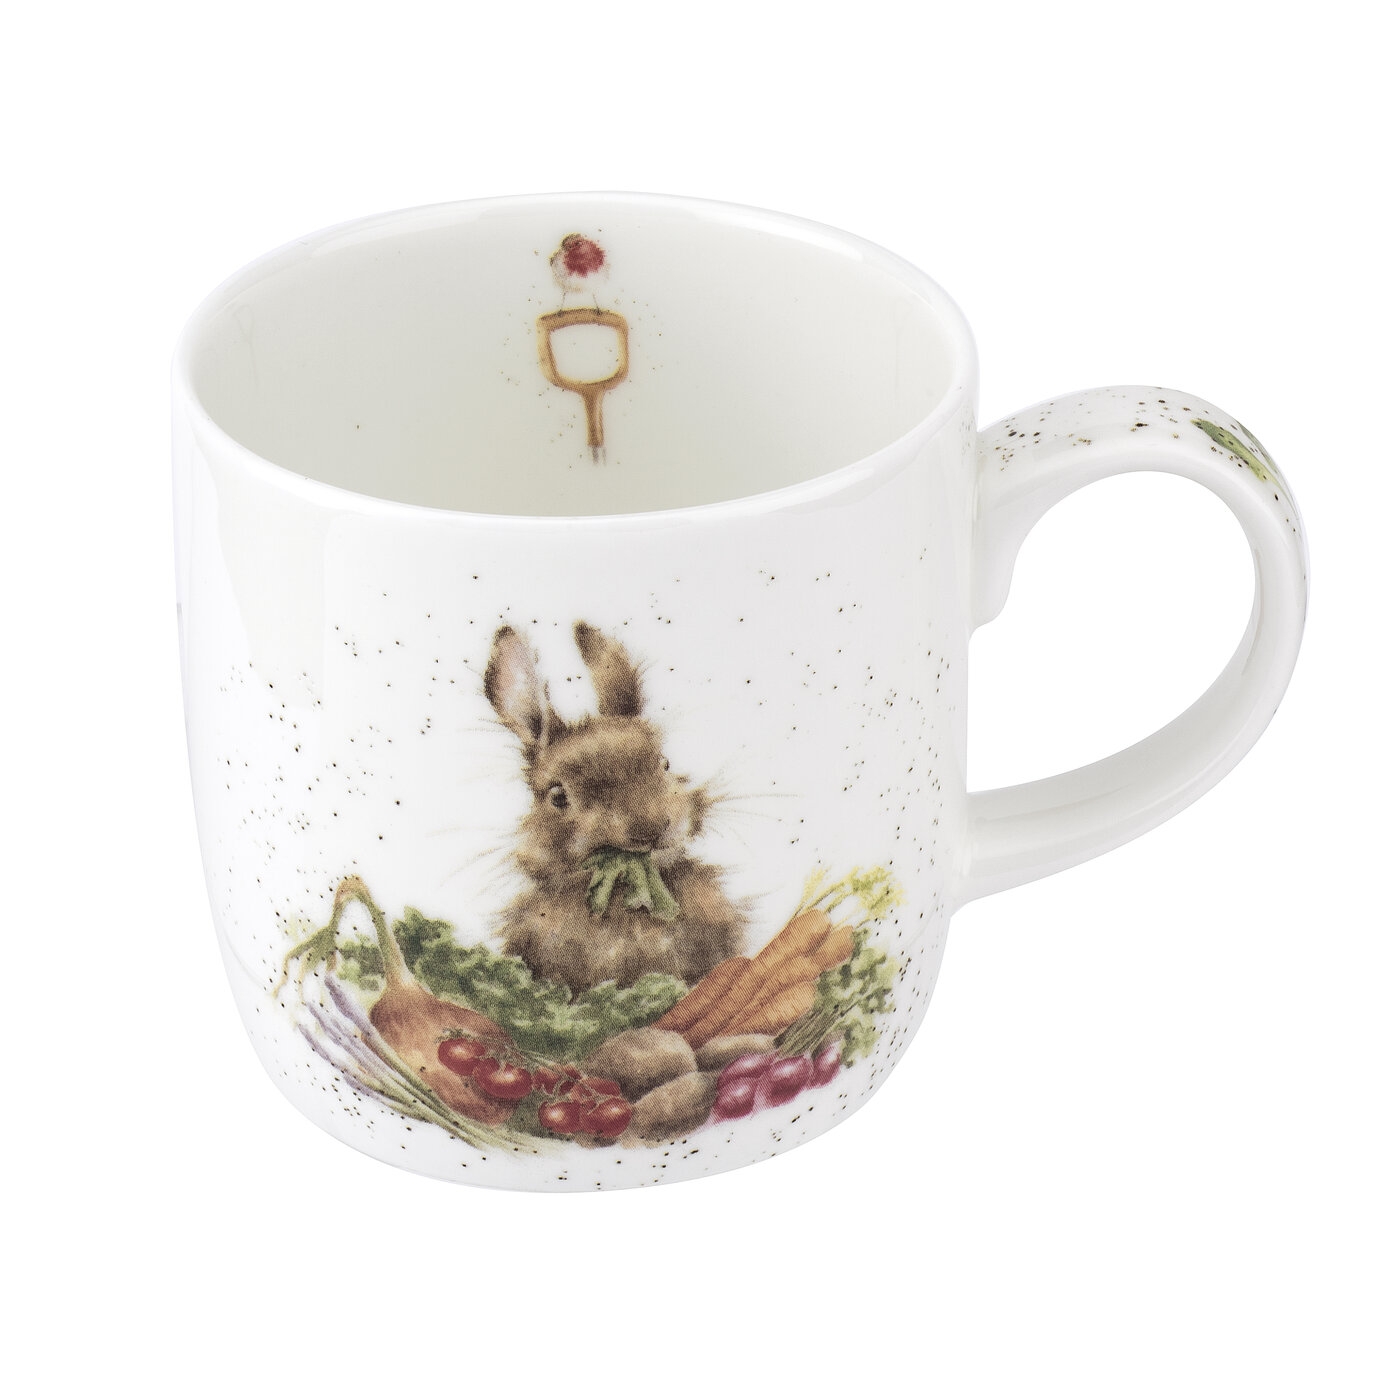 Wrendale Designs Grow Your Own 14 fl.oz. Mug, Hare image number null